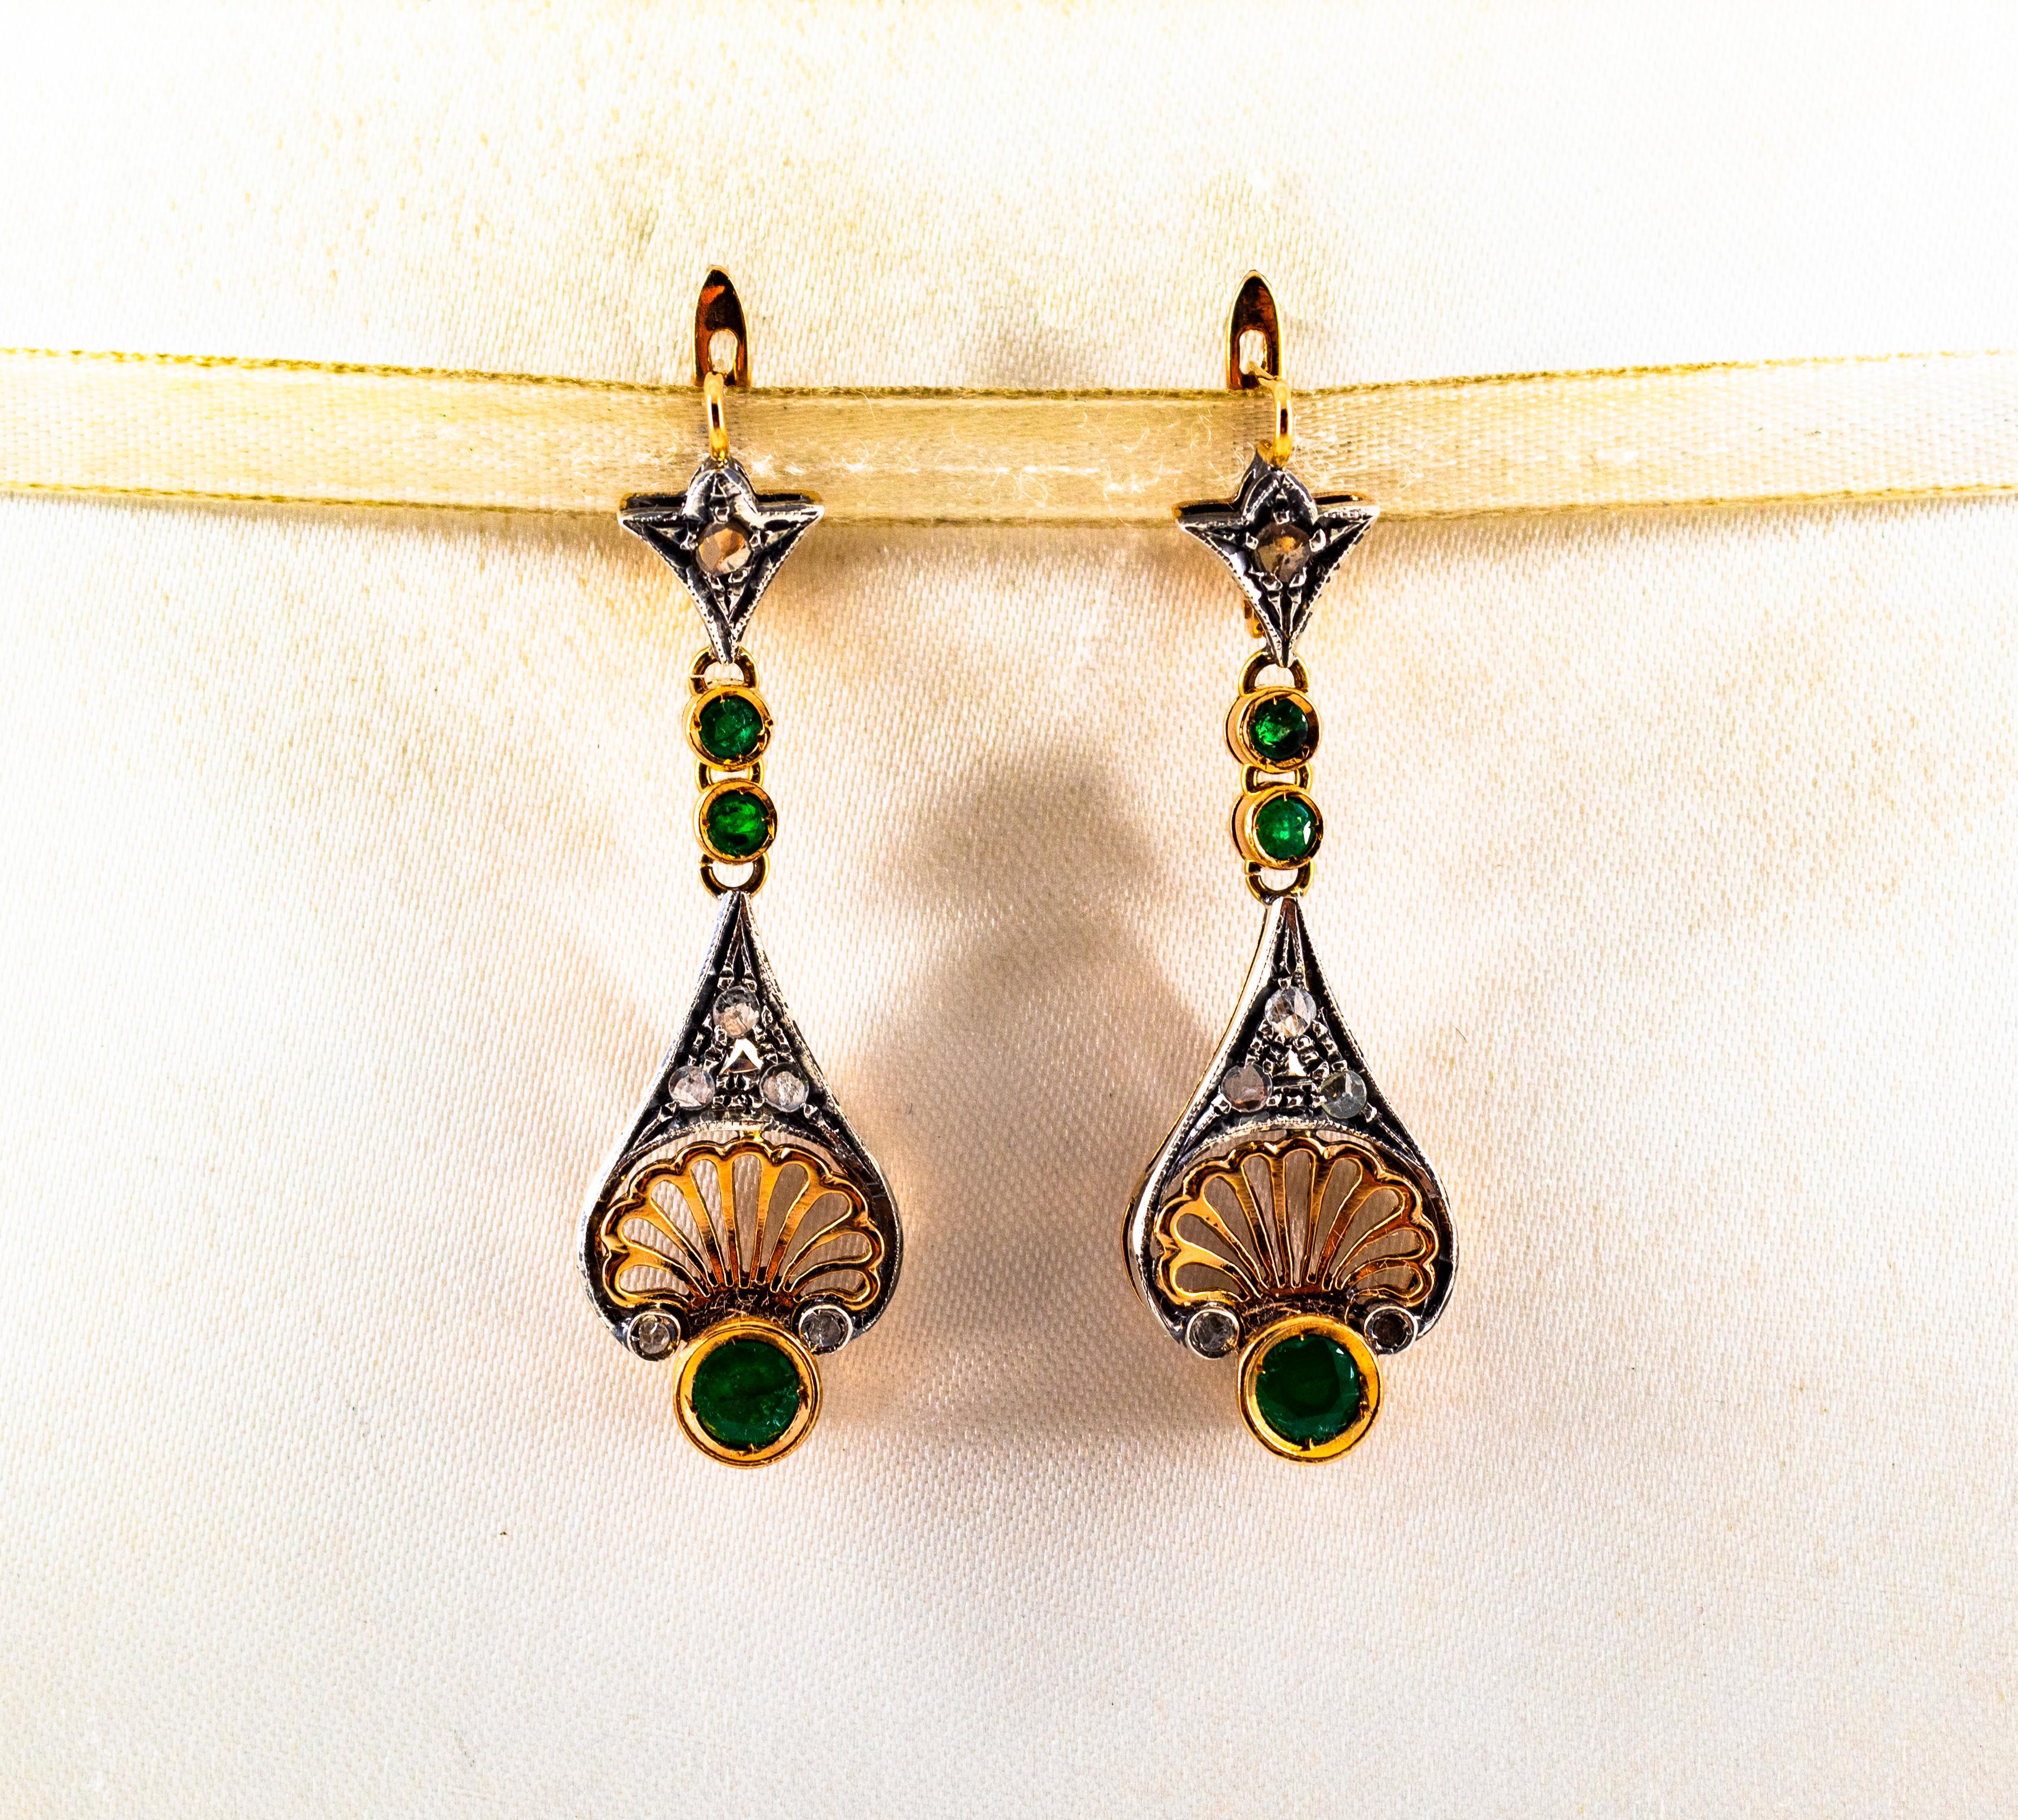 These Lever-Back Earrings are made of 9K Yellow Gold and Sterling Silver.
These Earrings have 0.30 Carats of White Rose Cut Diamonds.
These Earrings have also 1.00 Carat of Emeralds.
These Earrings are available also with Rubies or Blue